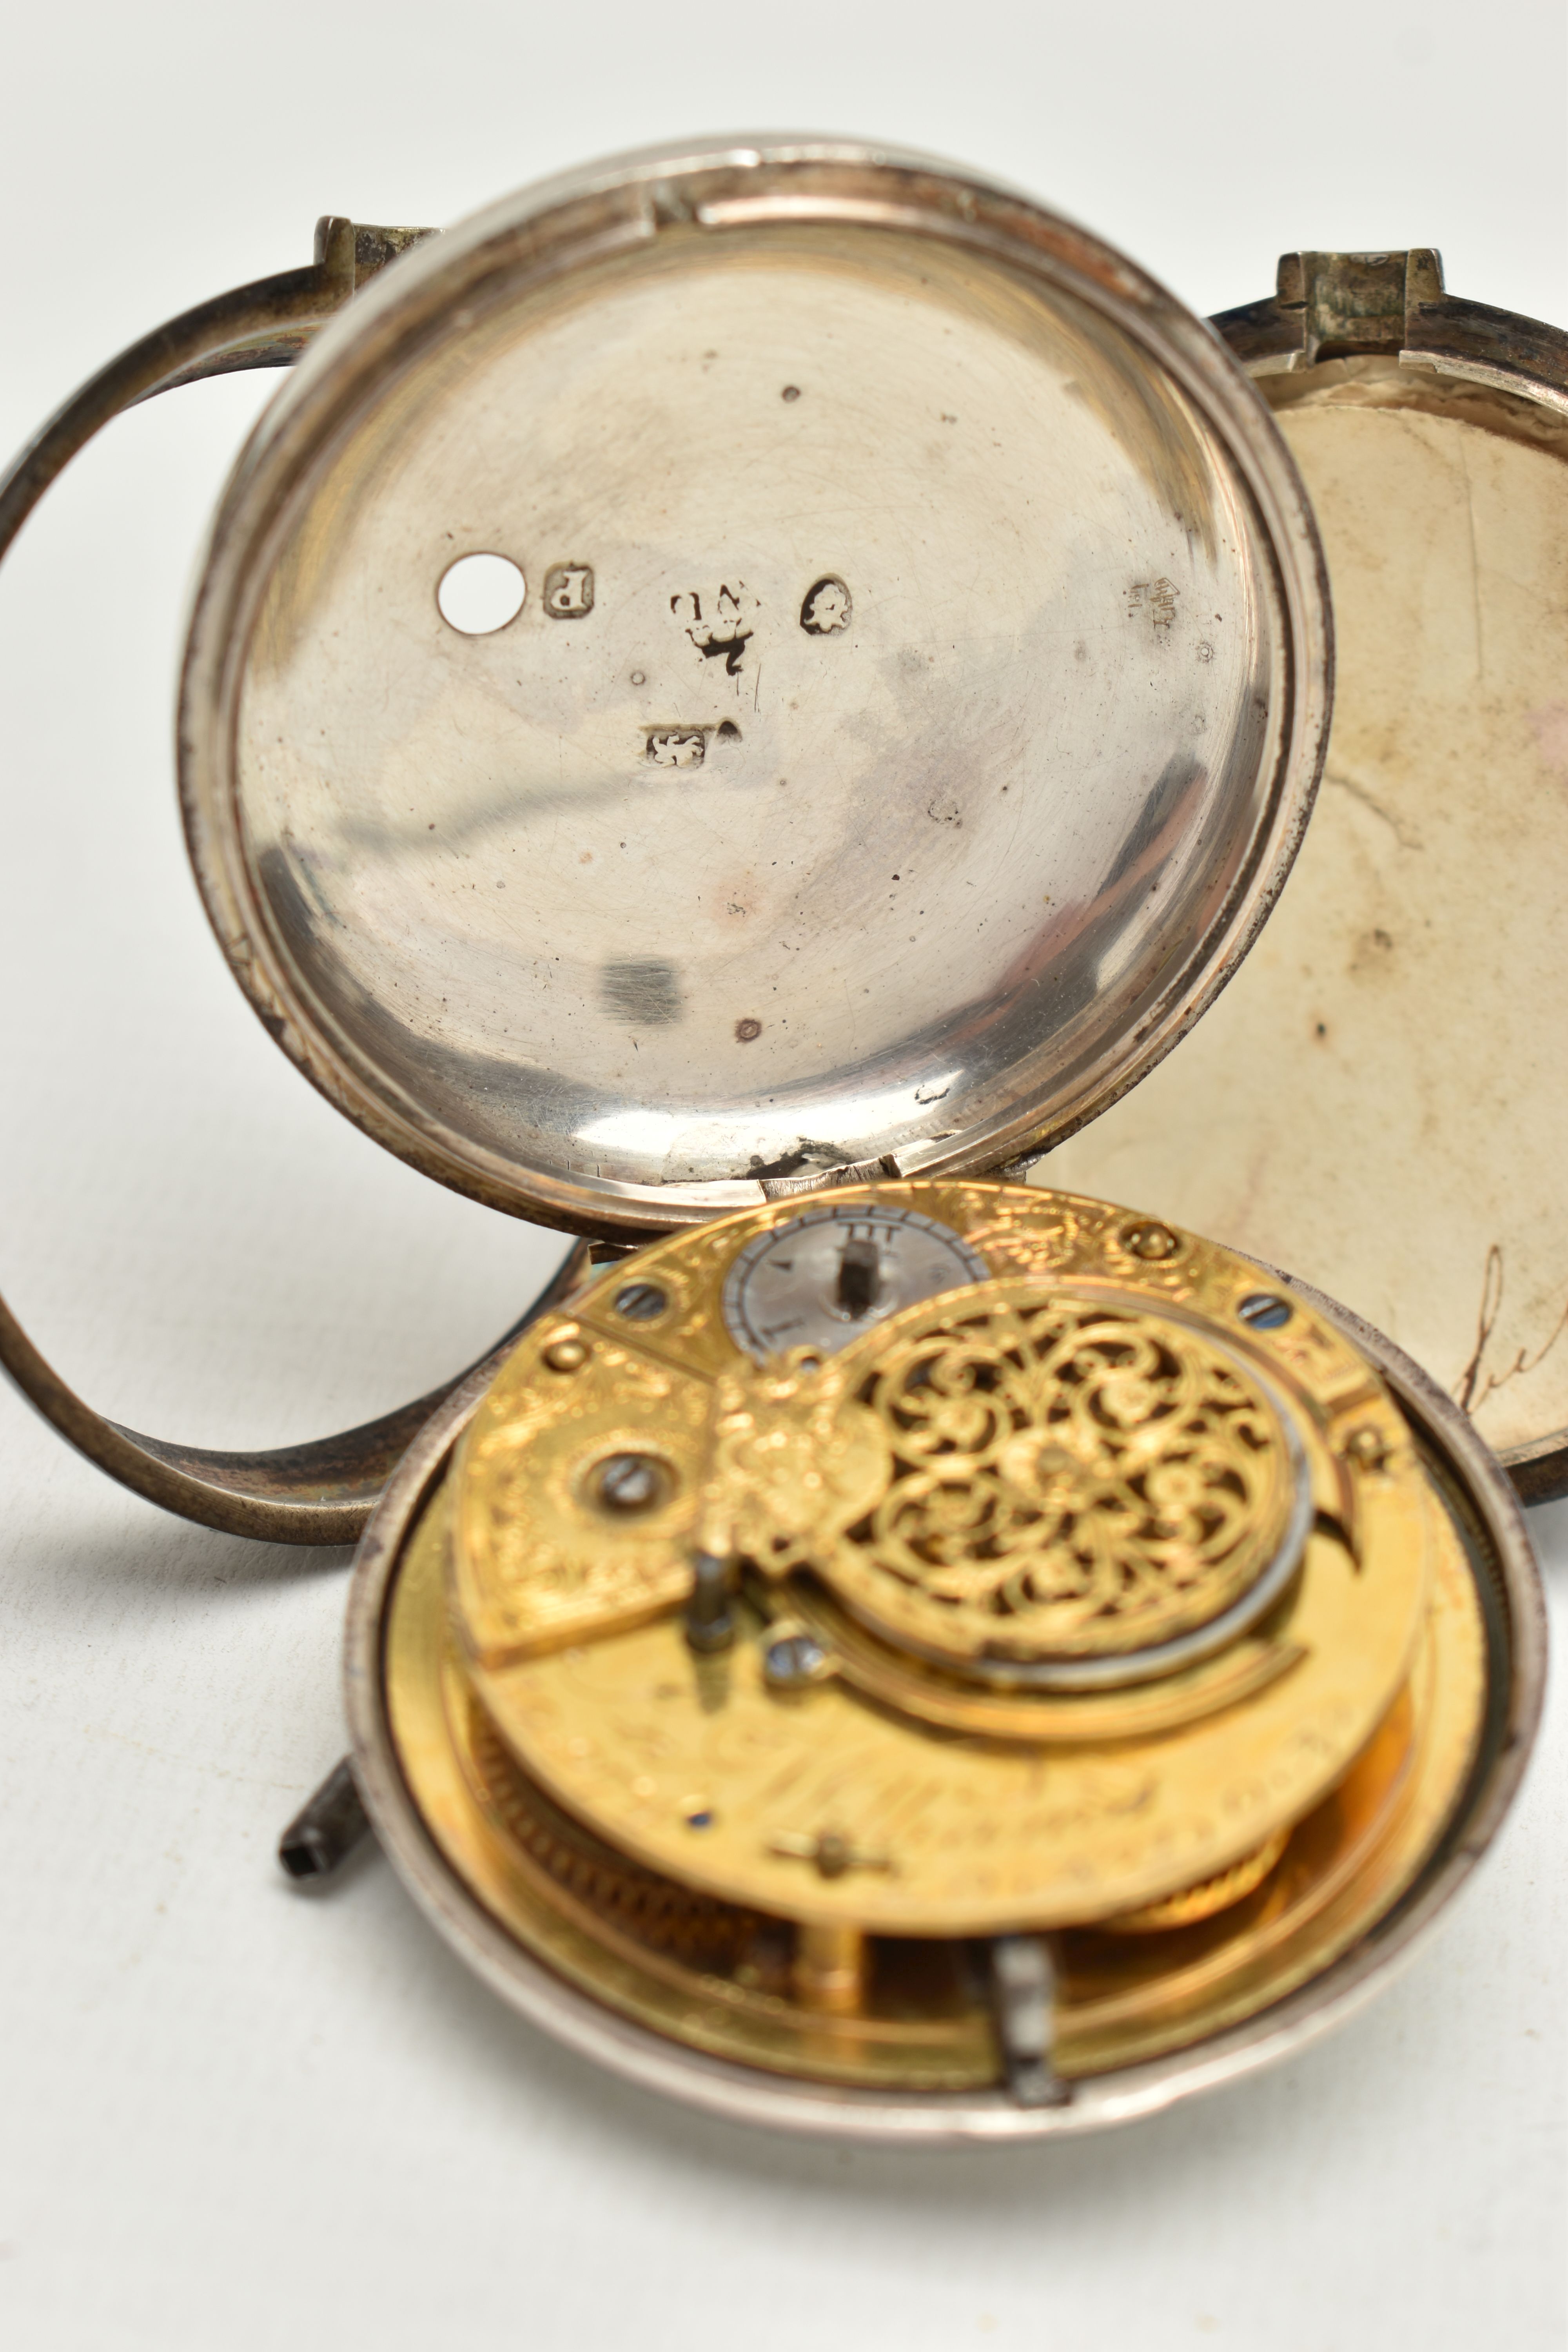 A GEORGE III SILVER PAIR CASED POCKET WATCH, the white enamel dial with Arabic numerals, painted - Image 9 of 9